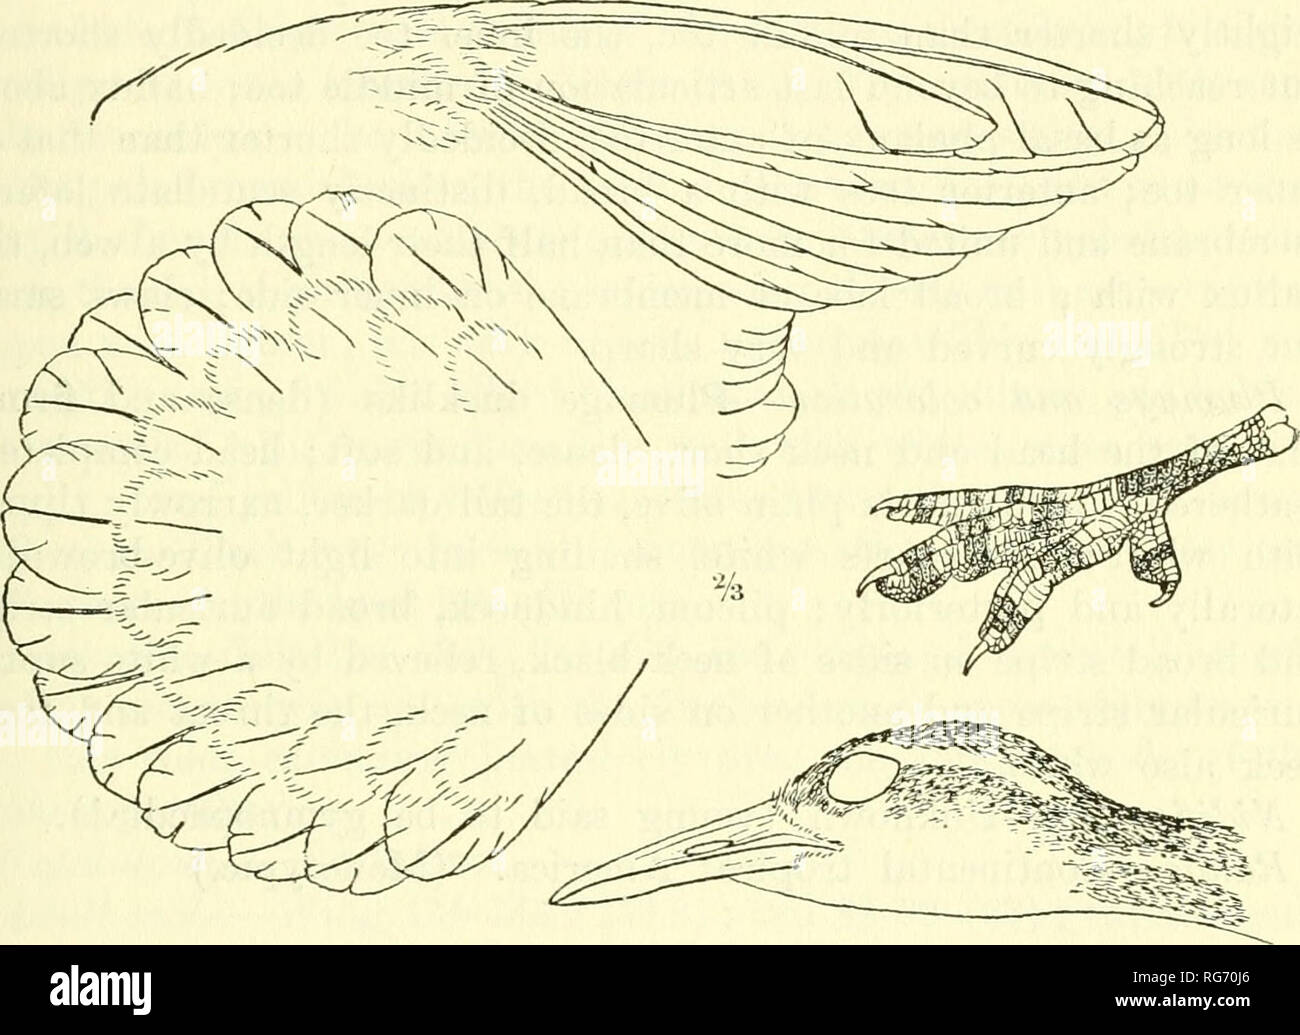 . Bulletin - United States National Museum. Science. BIRDS OF NORTH AND MIDDLE AMERICA 227 Podia (emendation) Swainson, Classif. Birds, ii, 1837, 192. Plotoides Beooices, Mus. Brookesianum, 1830, 109. (Type, Plotus surinamen^is Gmelin=Colyml)ii.s fiilica Boddaert.) Small Heliornithidae (length about 300 mm.) with feet relatively small and weak (the tarsus less than one-fifth as long as wing, de- cidedly shorter than the relatively small slender bill, the latter not longer than head); anterior toes extensively webbed, the web between middle and outer toes extending for entire length of first tw Stock Photo